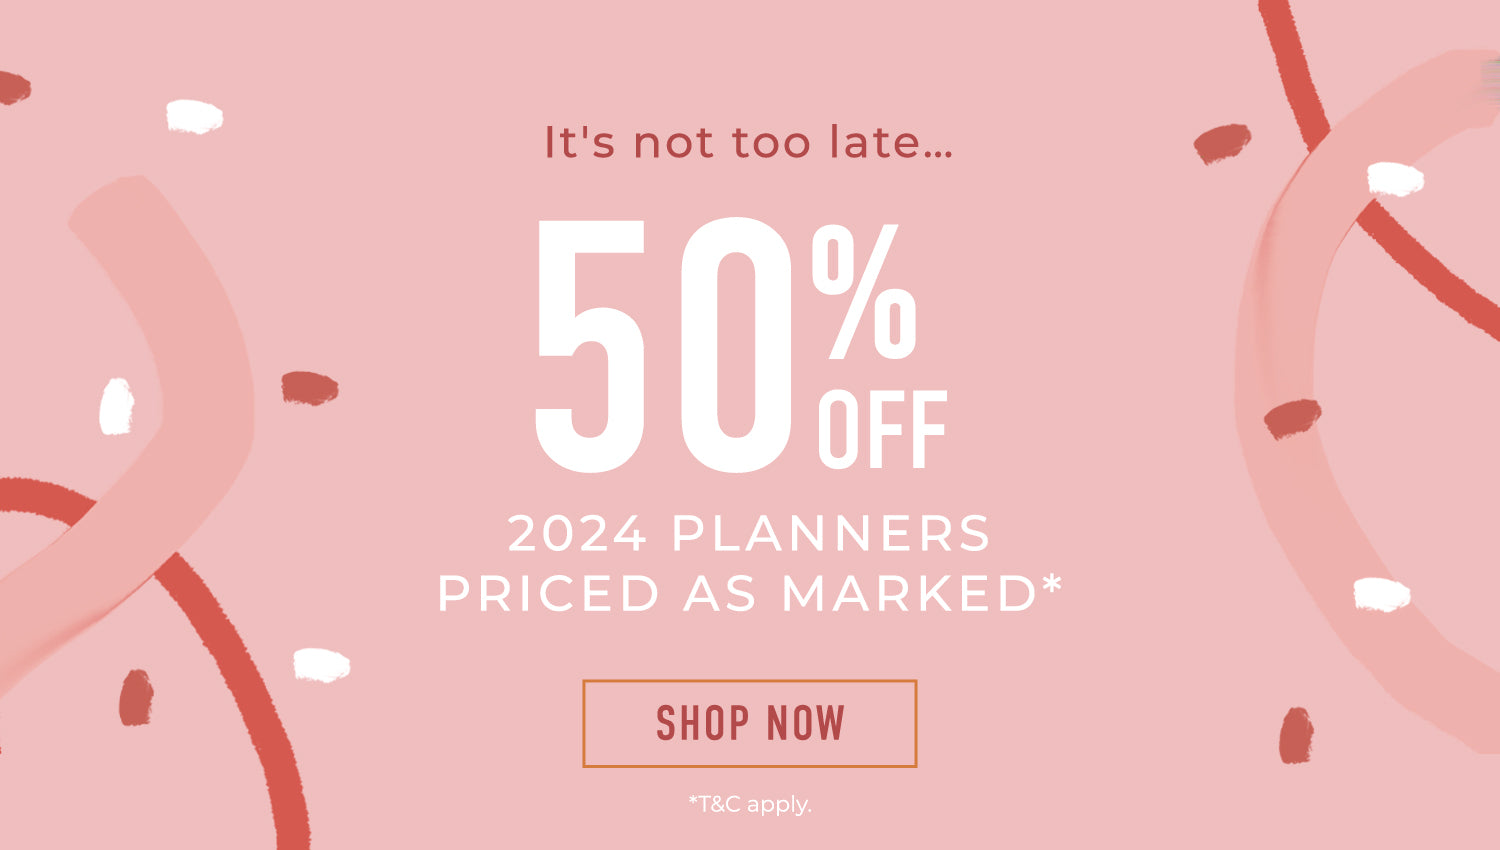 50% Off 2024 Planners - Prices as marked.